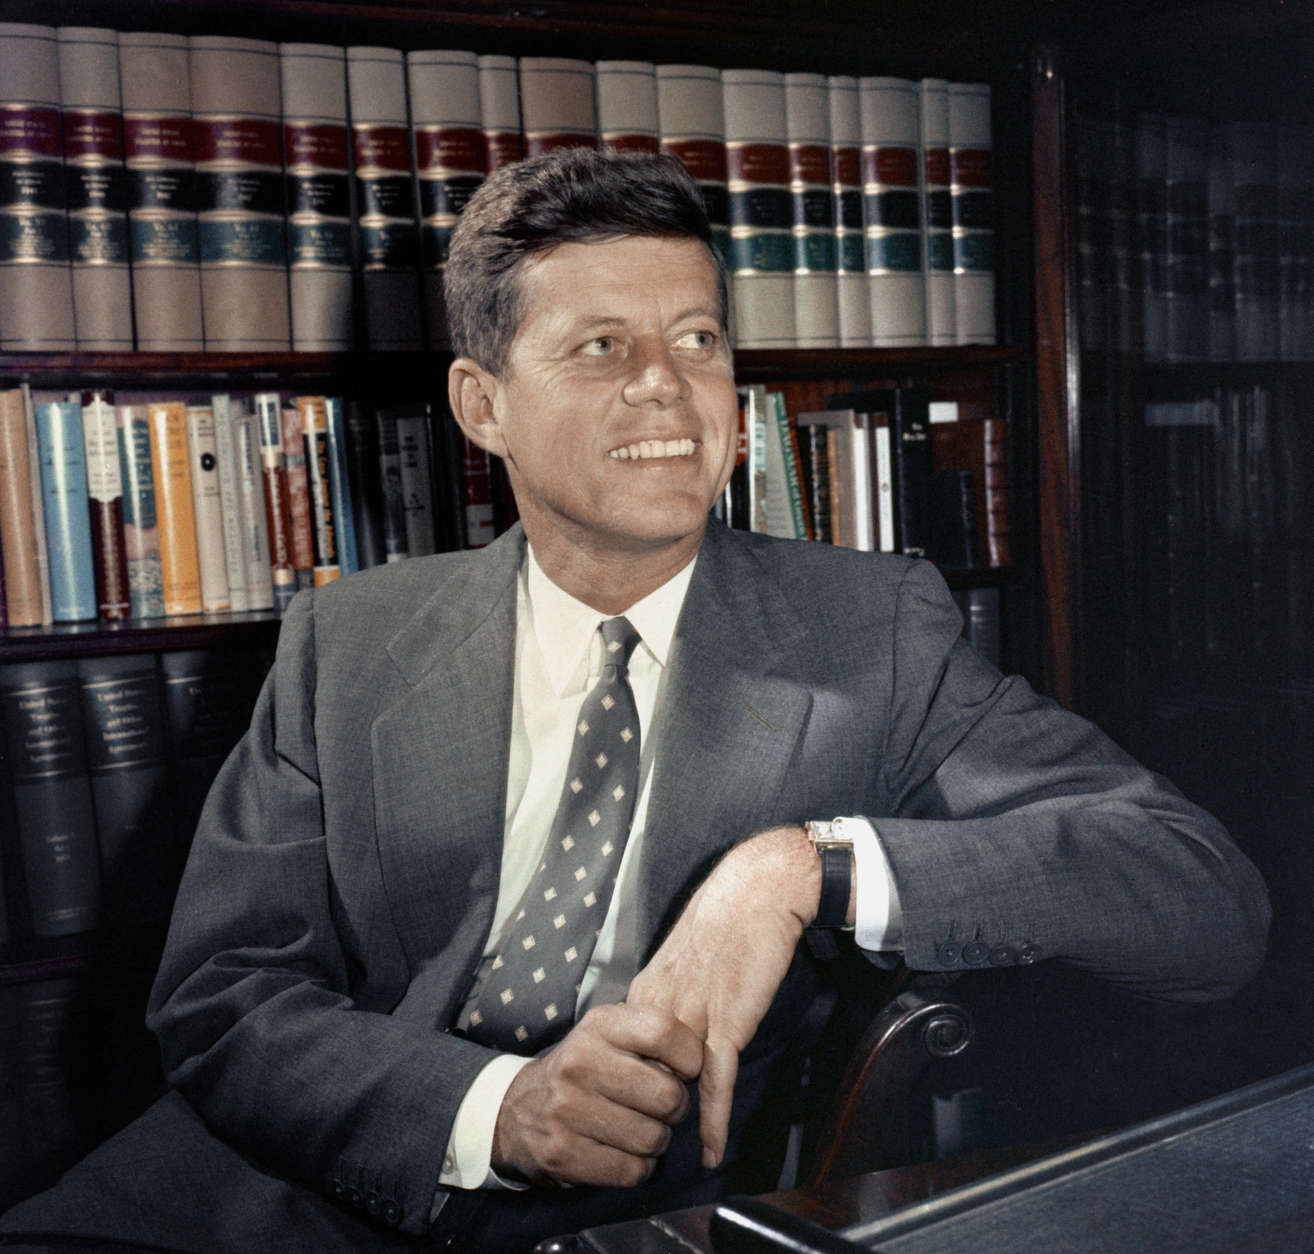 photos-president-john-f-kennedy-turns-100-his-life-and-times-wtop-news